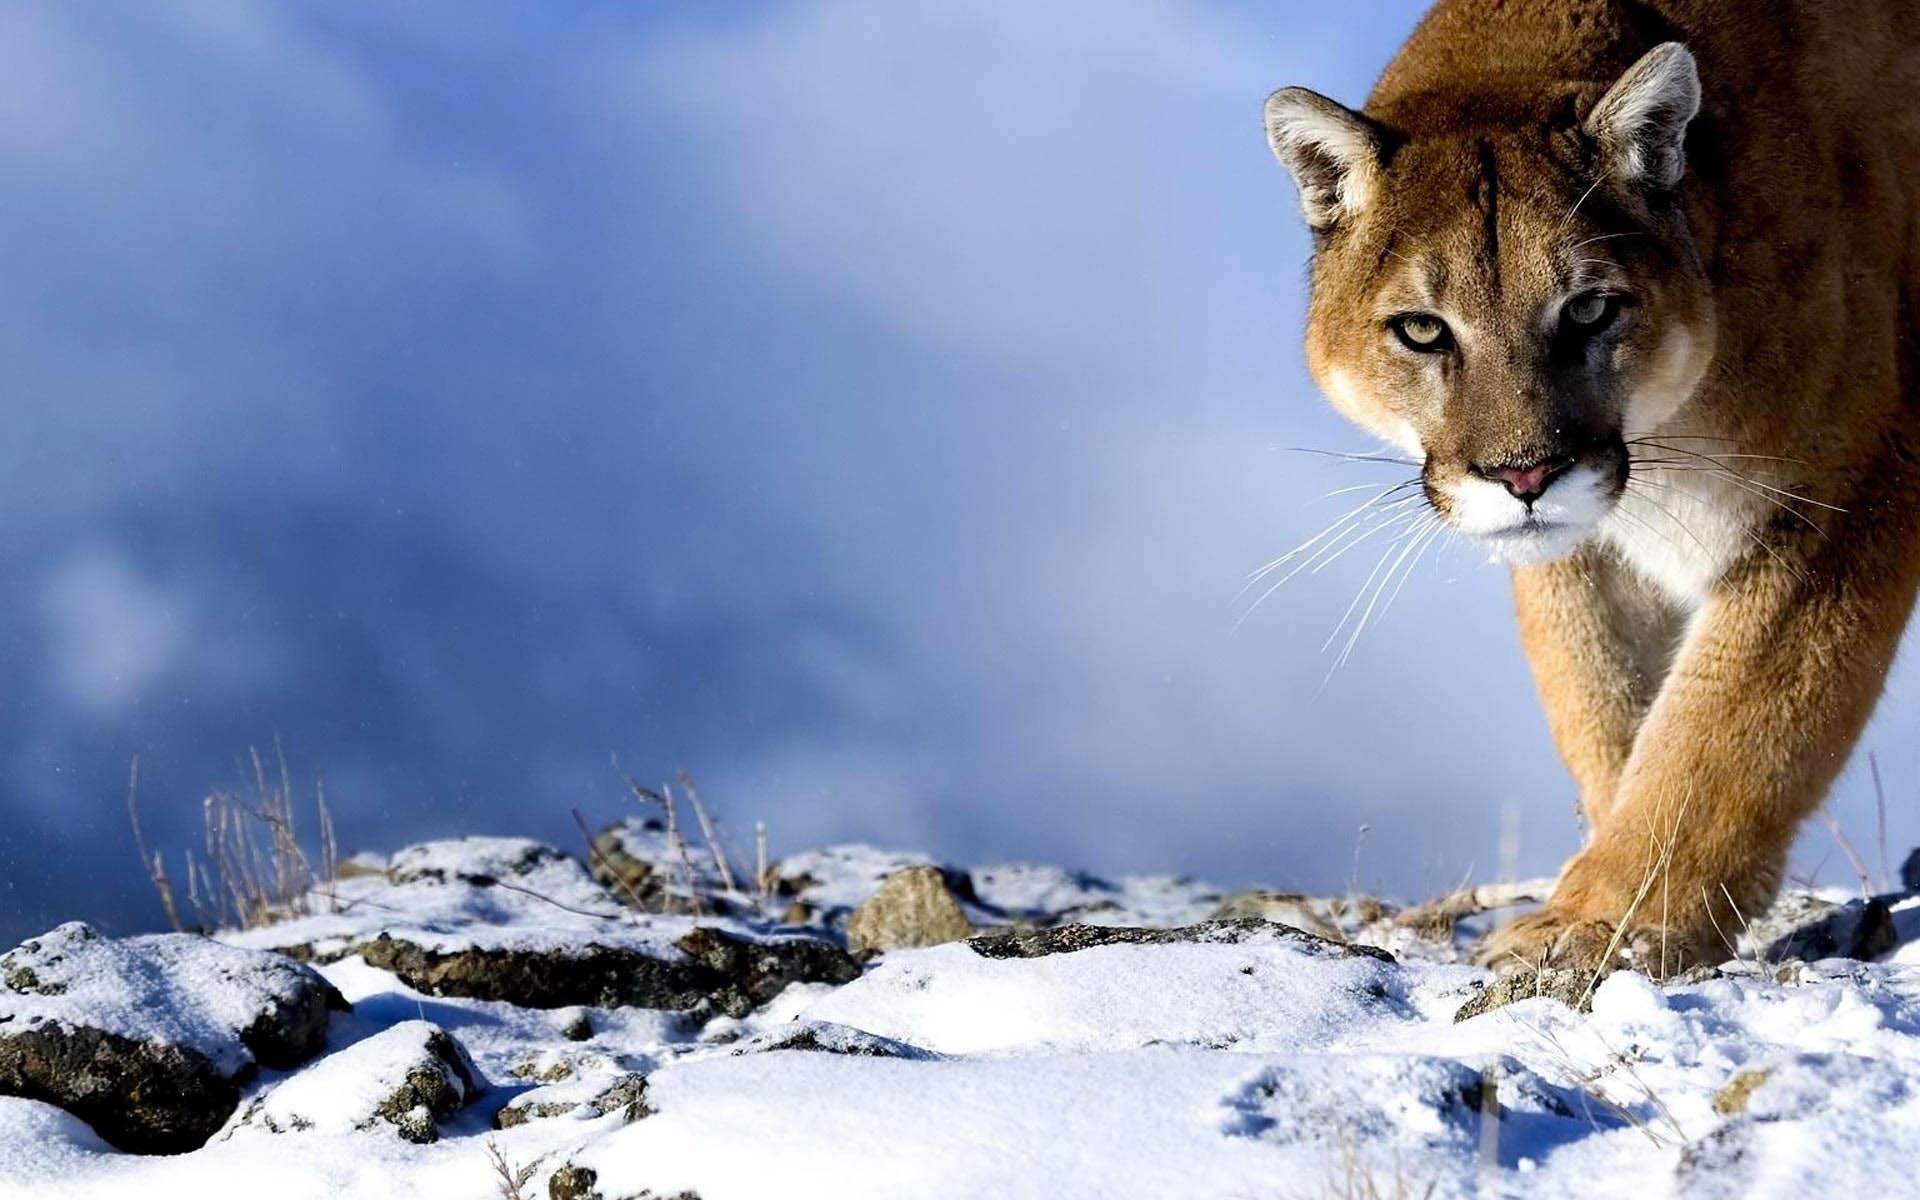 Mountain Lion HD Wallpaper | Mountain Lion Images | Cool Wallpapers